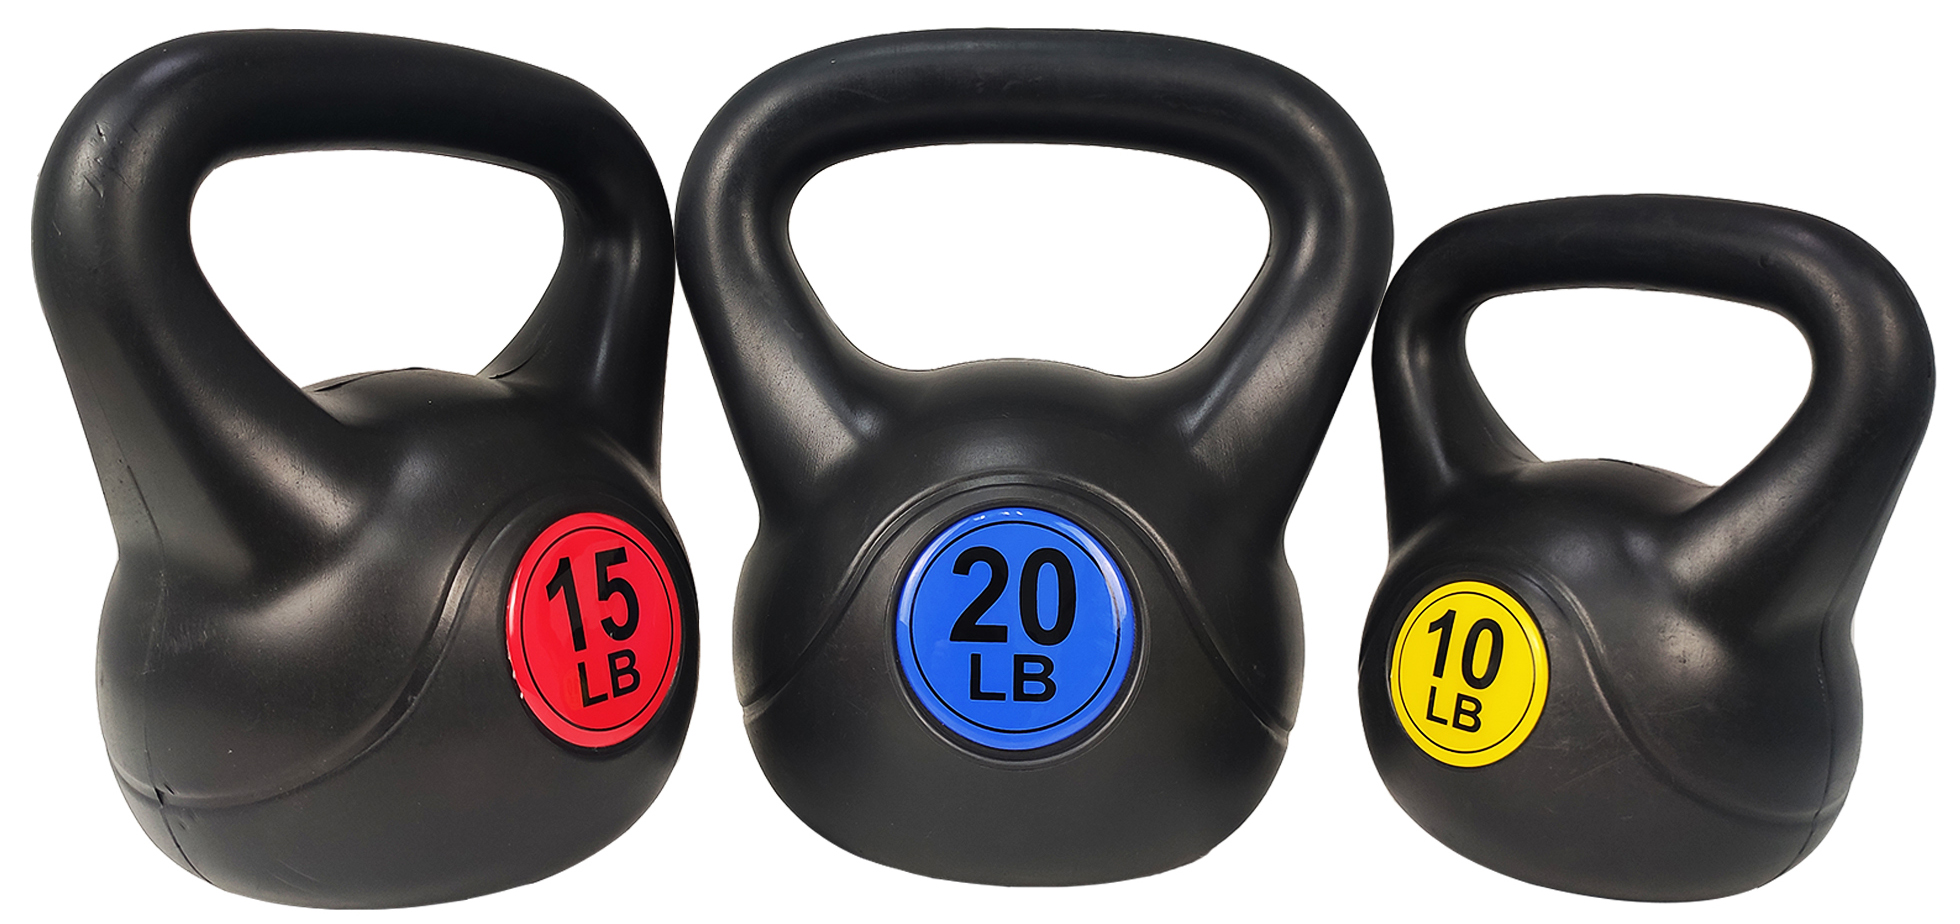 BalanceFrom Wide Grip Kettlebell Exercise Fitness Weight Set, 3-Pieces: 10lb, 15lb and 20lb Kettlebells - image 3 of 6